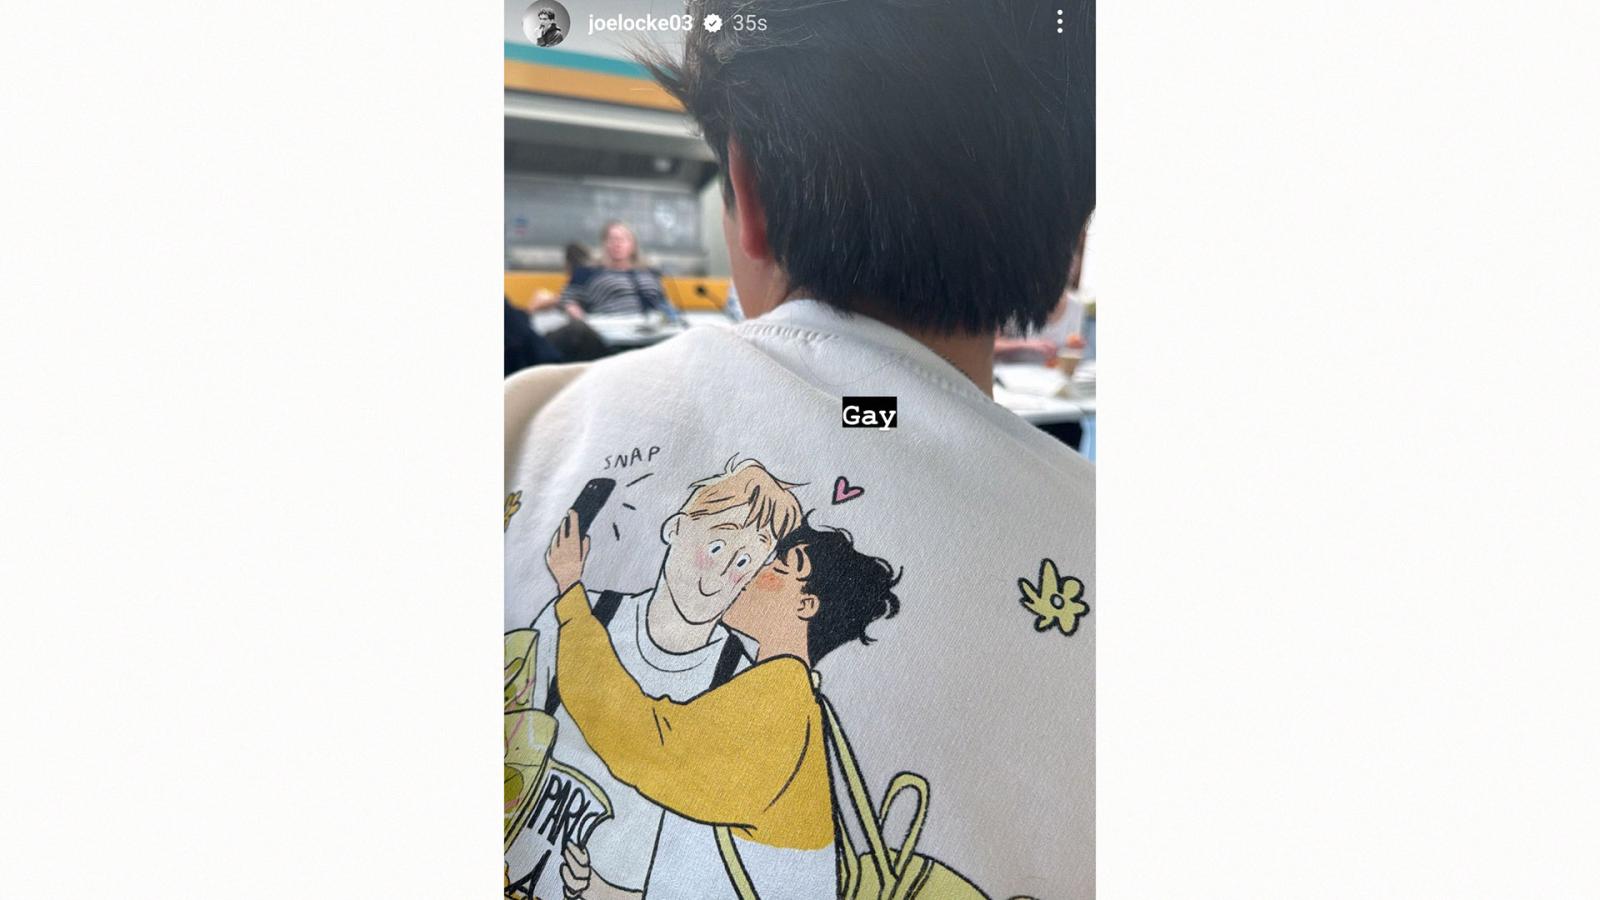 Heartstopper Cast Already Working on Season 3, And We Got the Perfect Proof - image 1